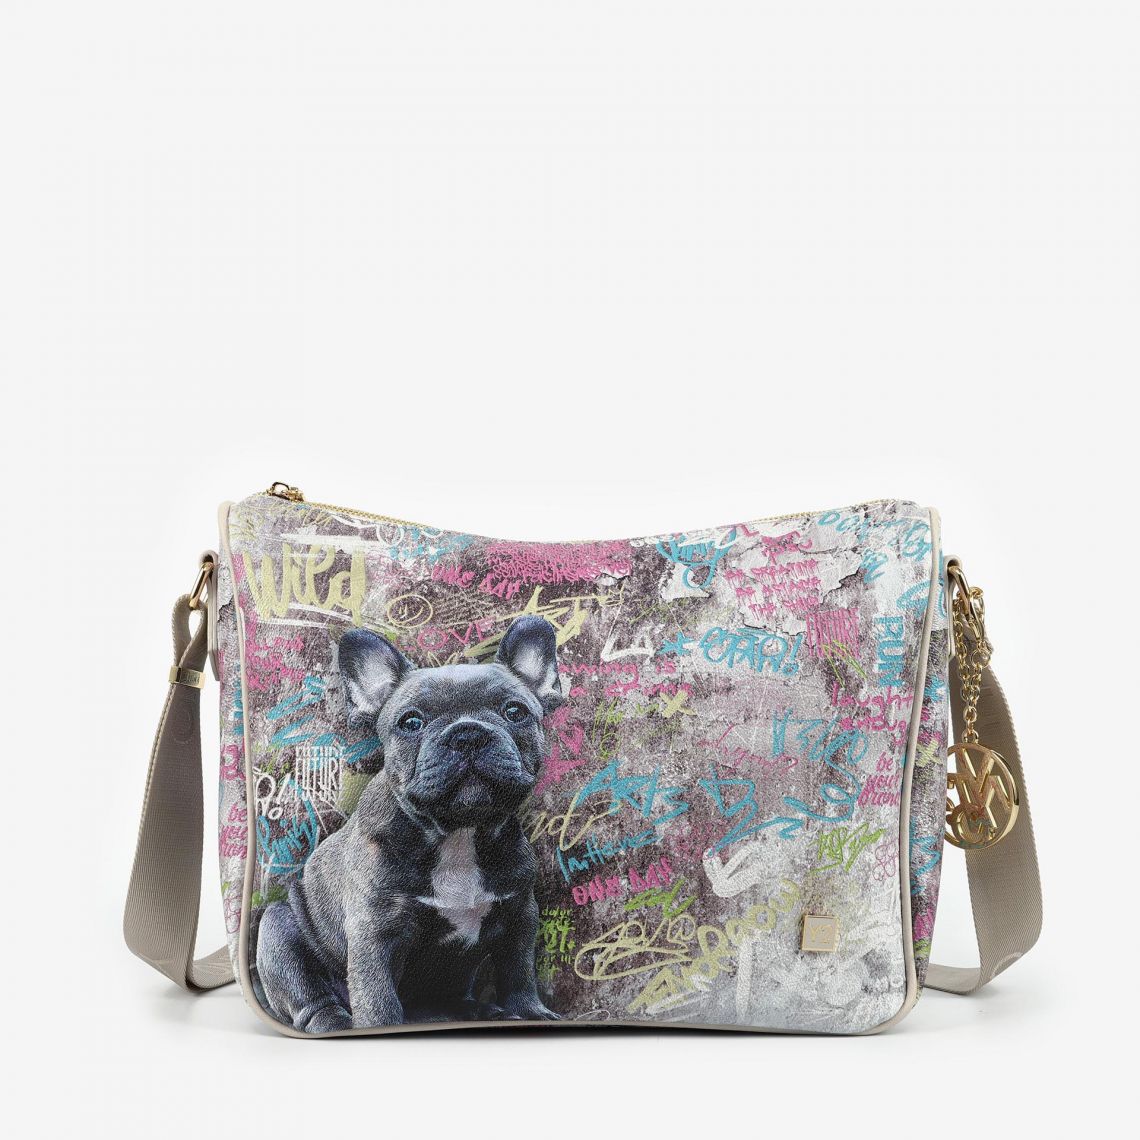 borsa donne Tracolla Dog Wall le sac outlet borse y not